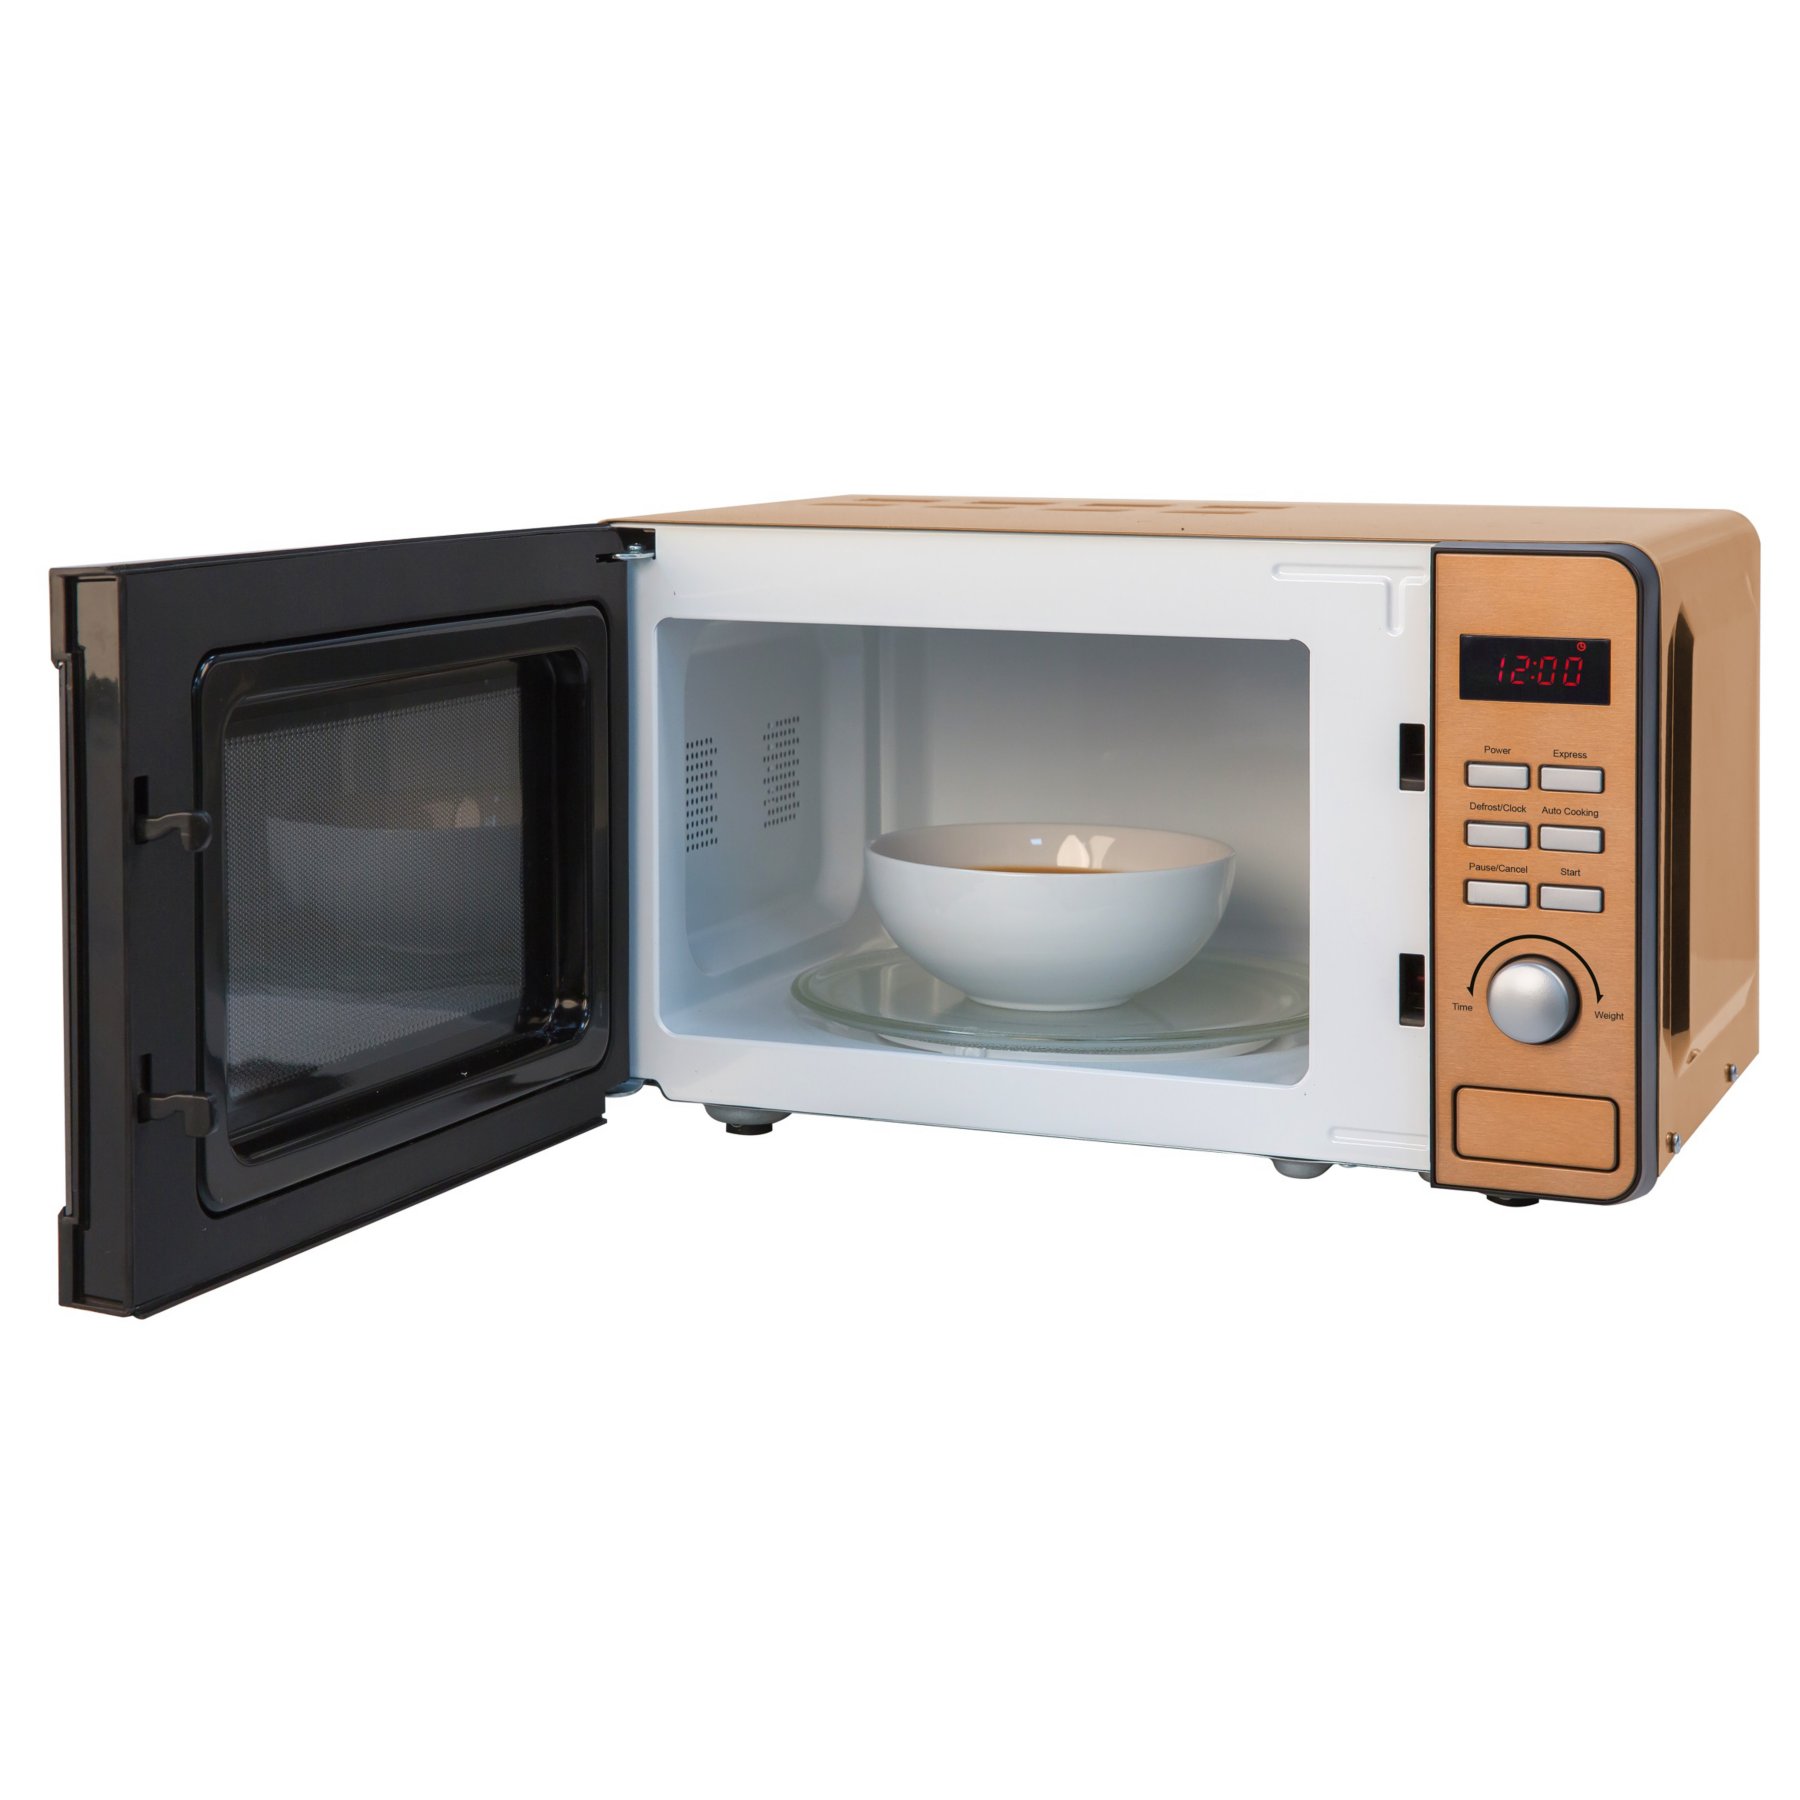 micromate review microwave